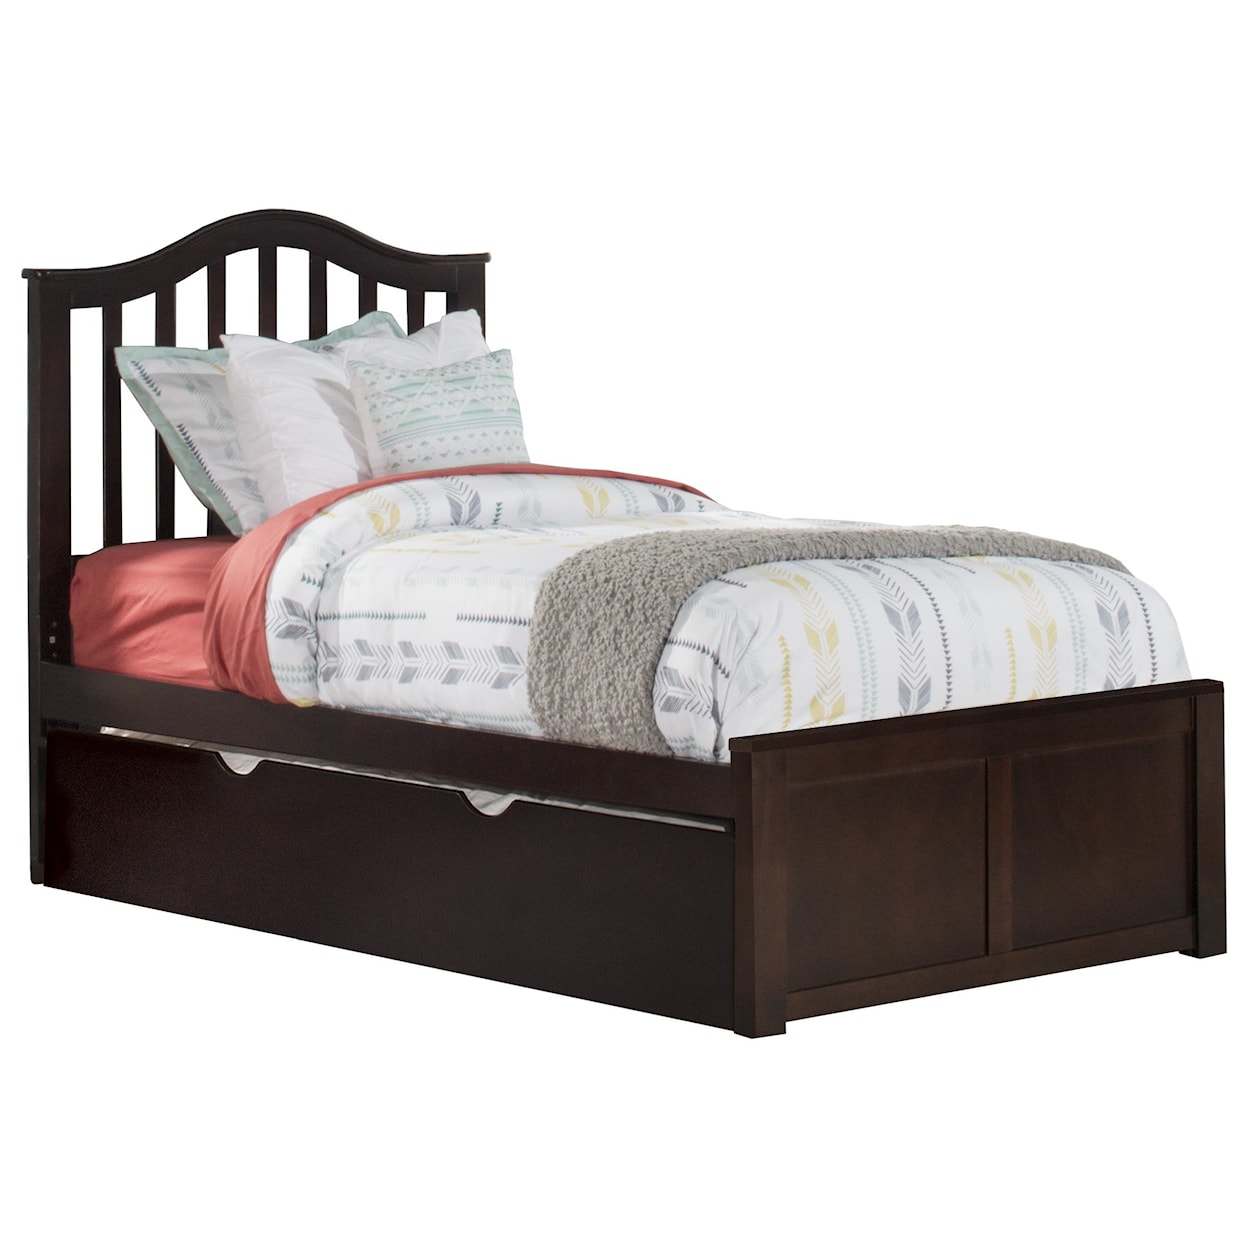 Hillsdale Schoolhouse Twin Bed w/ Trundle